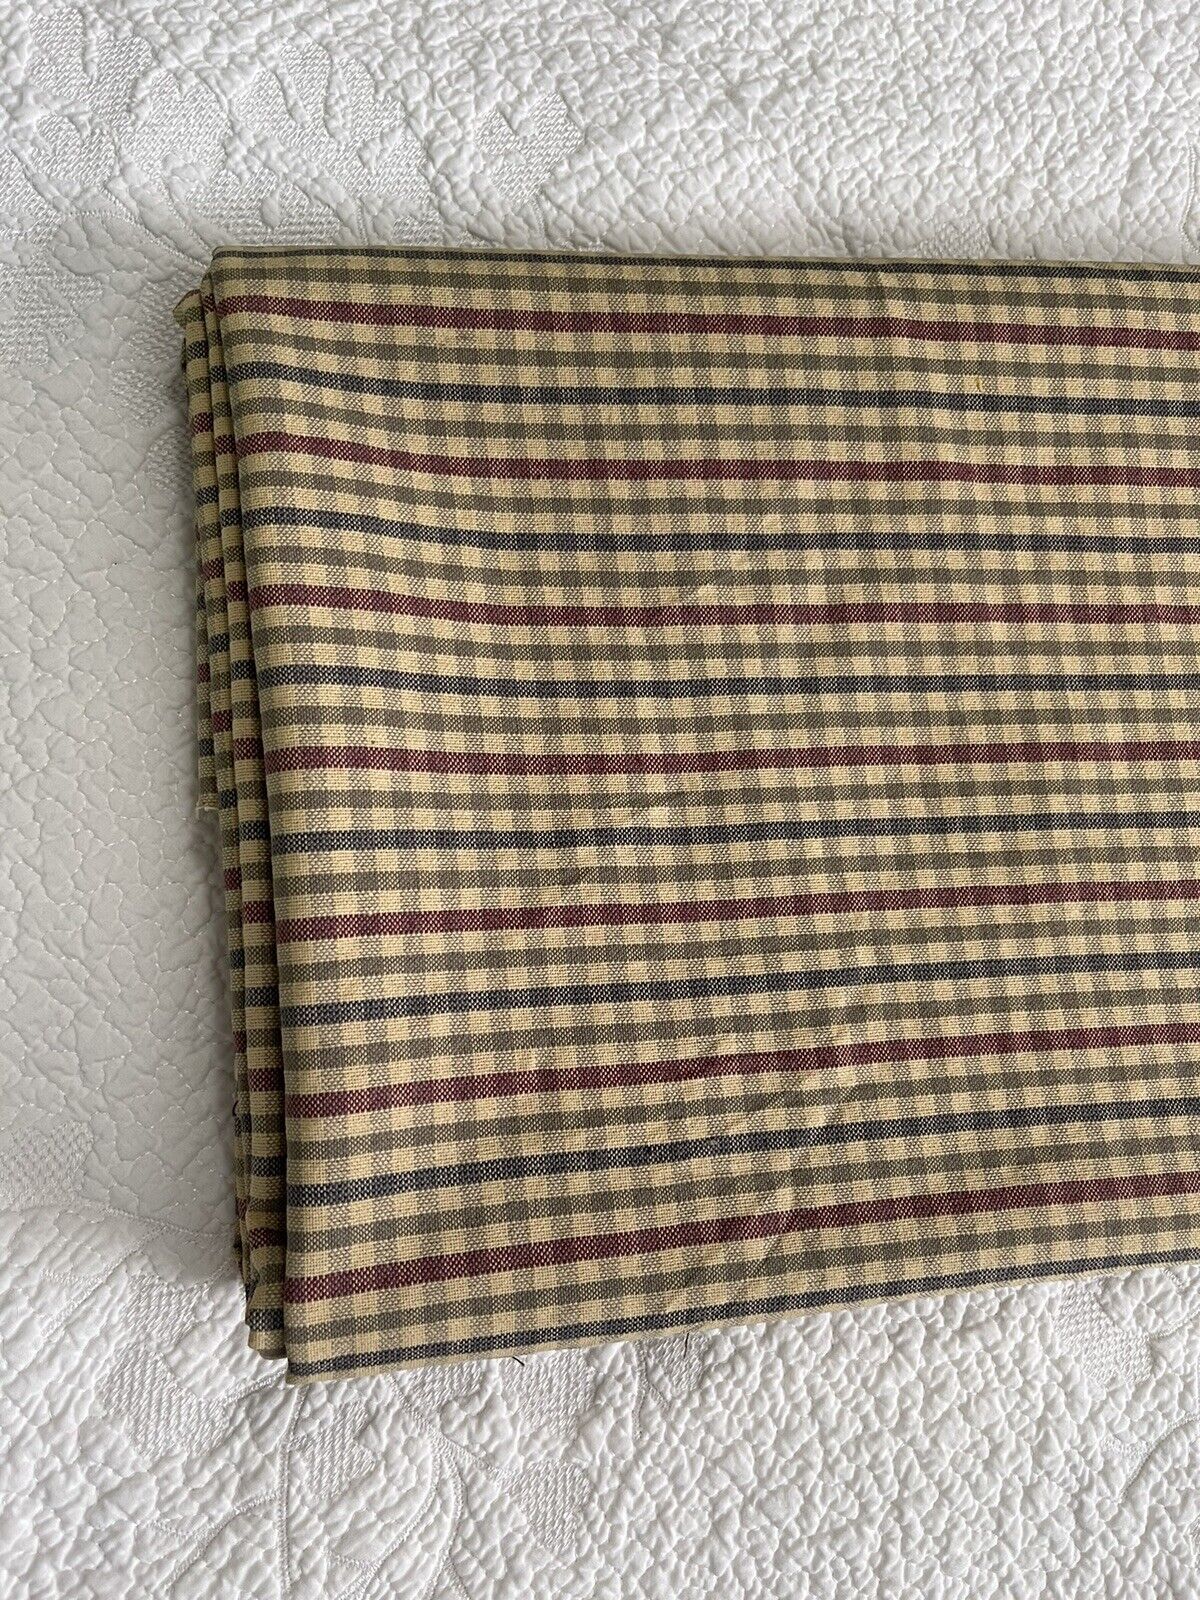 Vintage 1970s Cotton Sewing Fabric Plaid Twill Upholstery 60”x55\